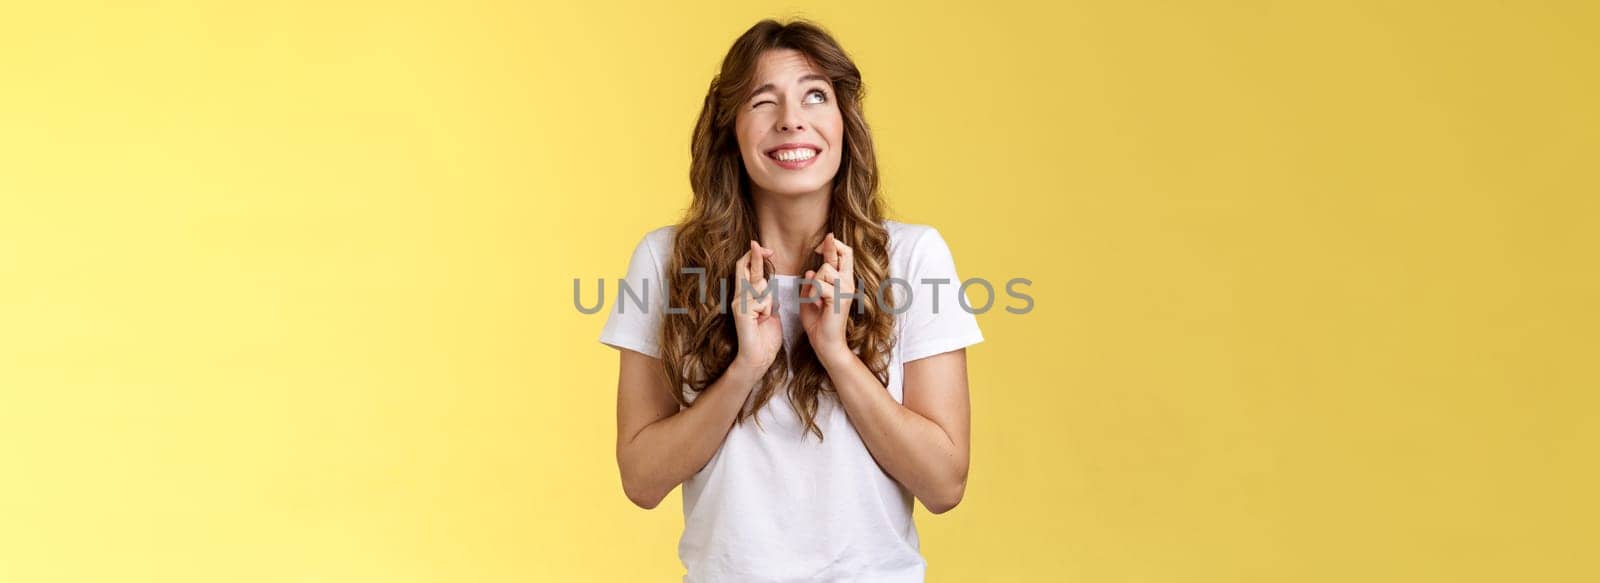 Hopeful optimistic enthusiastic girl believe god help smiling broadly close eyes make wish peeking up one eye smiling broadly cross fingers good luck implore Lord wish come true yellow background by Benzoix